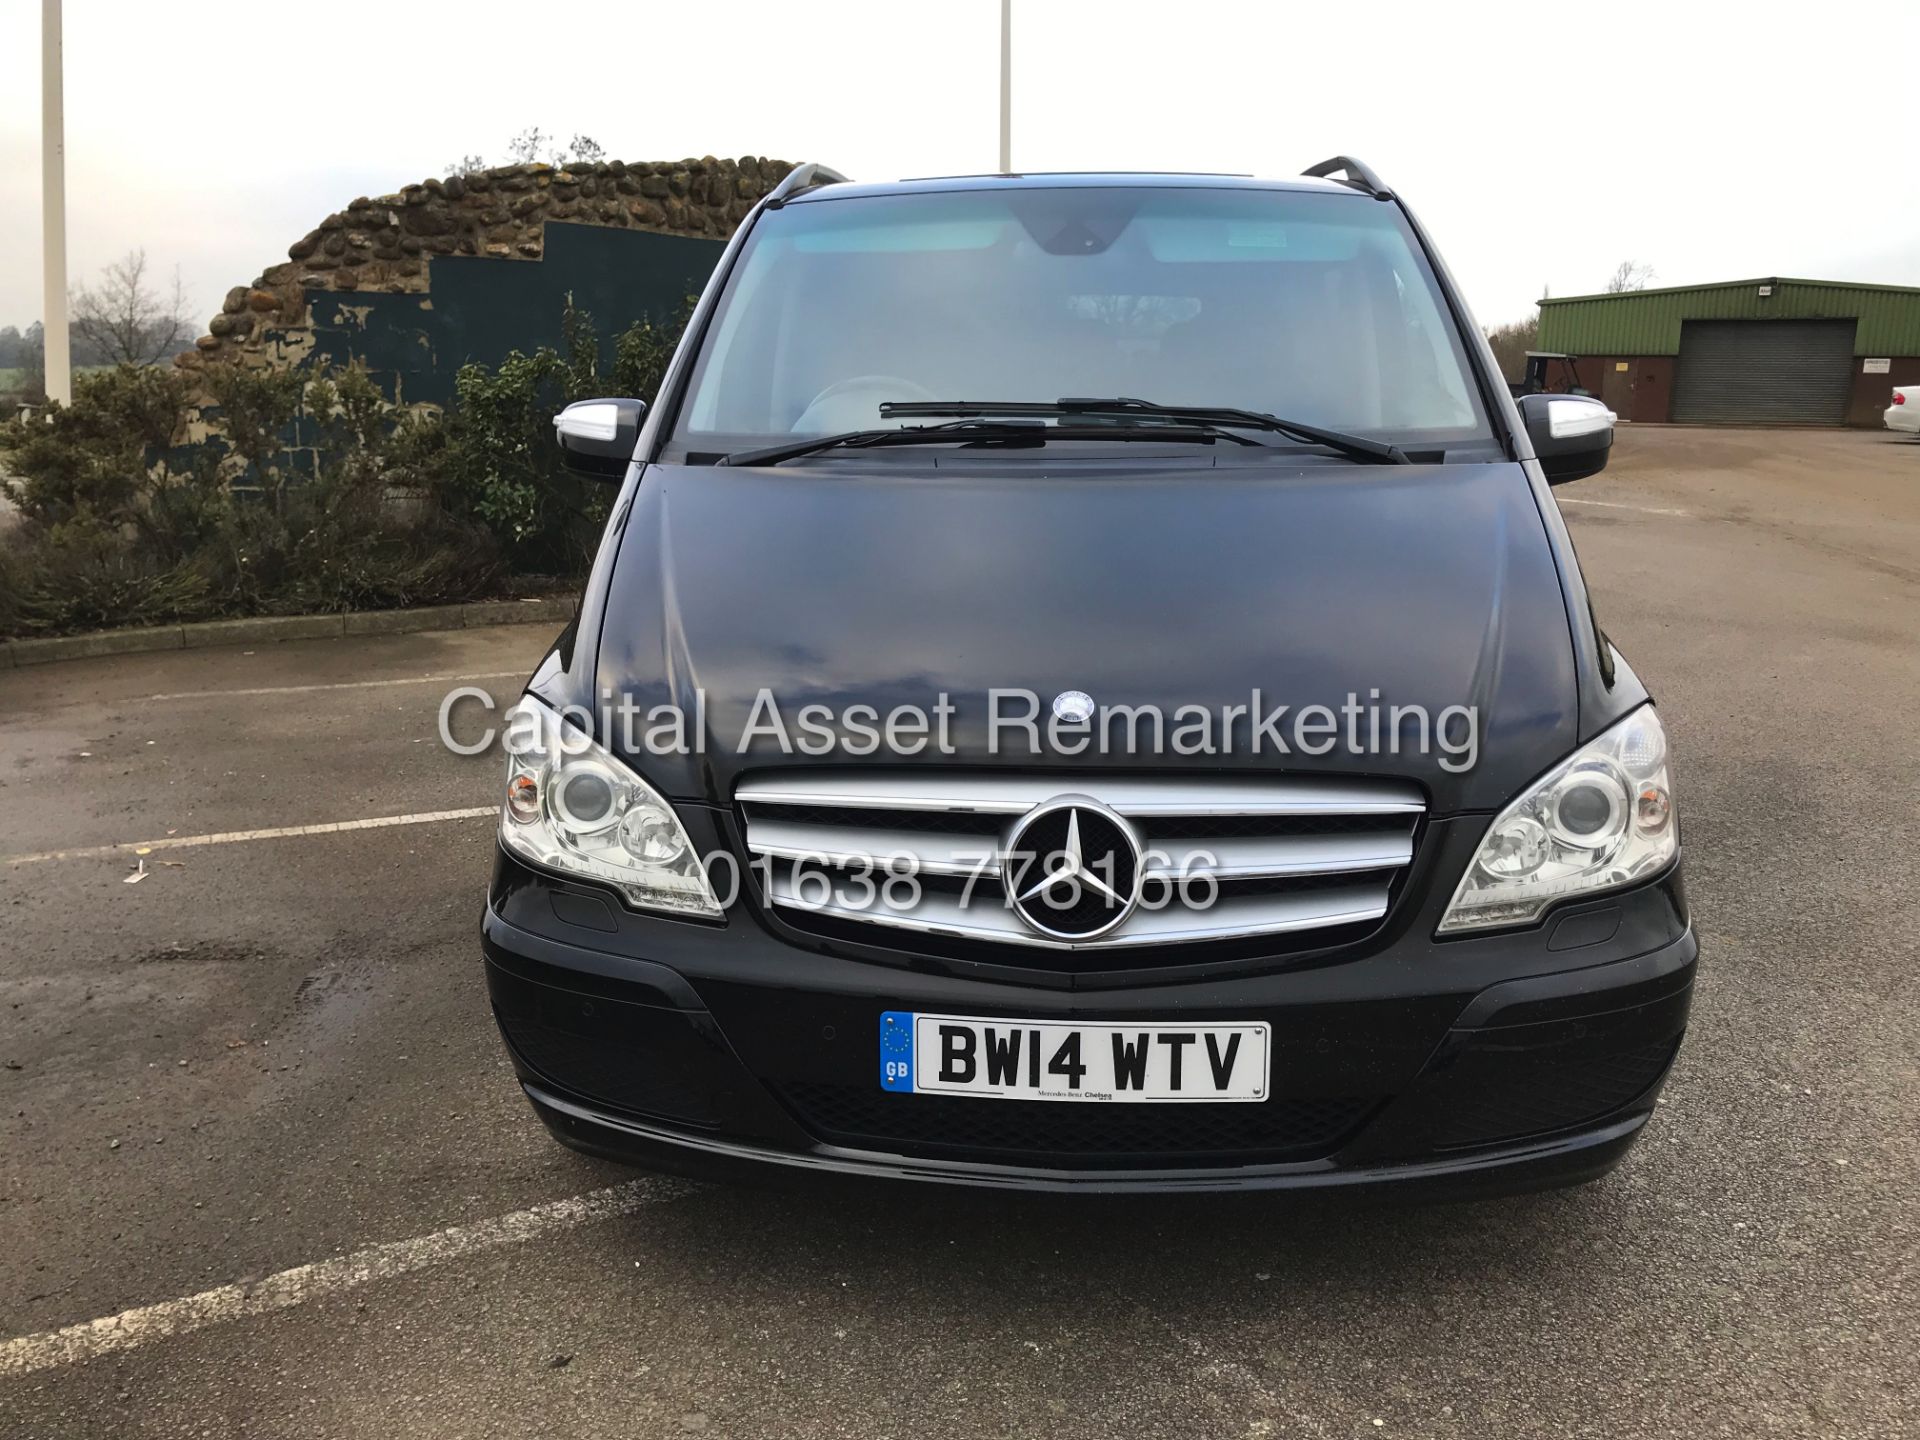 (ON SALE) MERCEDES VIANO 2.2CDI "AMBIENET" XLWB 8 SEATER (14 REG) 1 OWNER - FULLY LOADED - LEATHER - Image 8 of 28